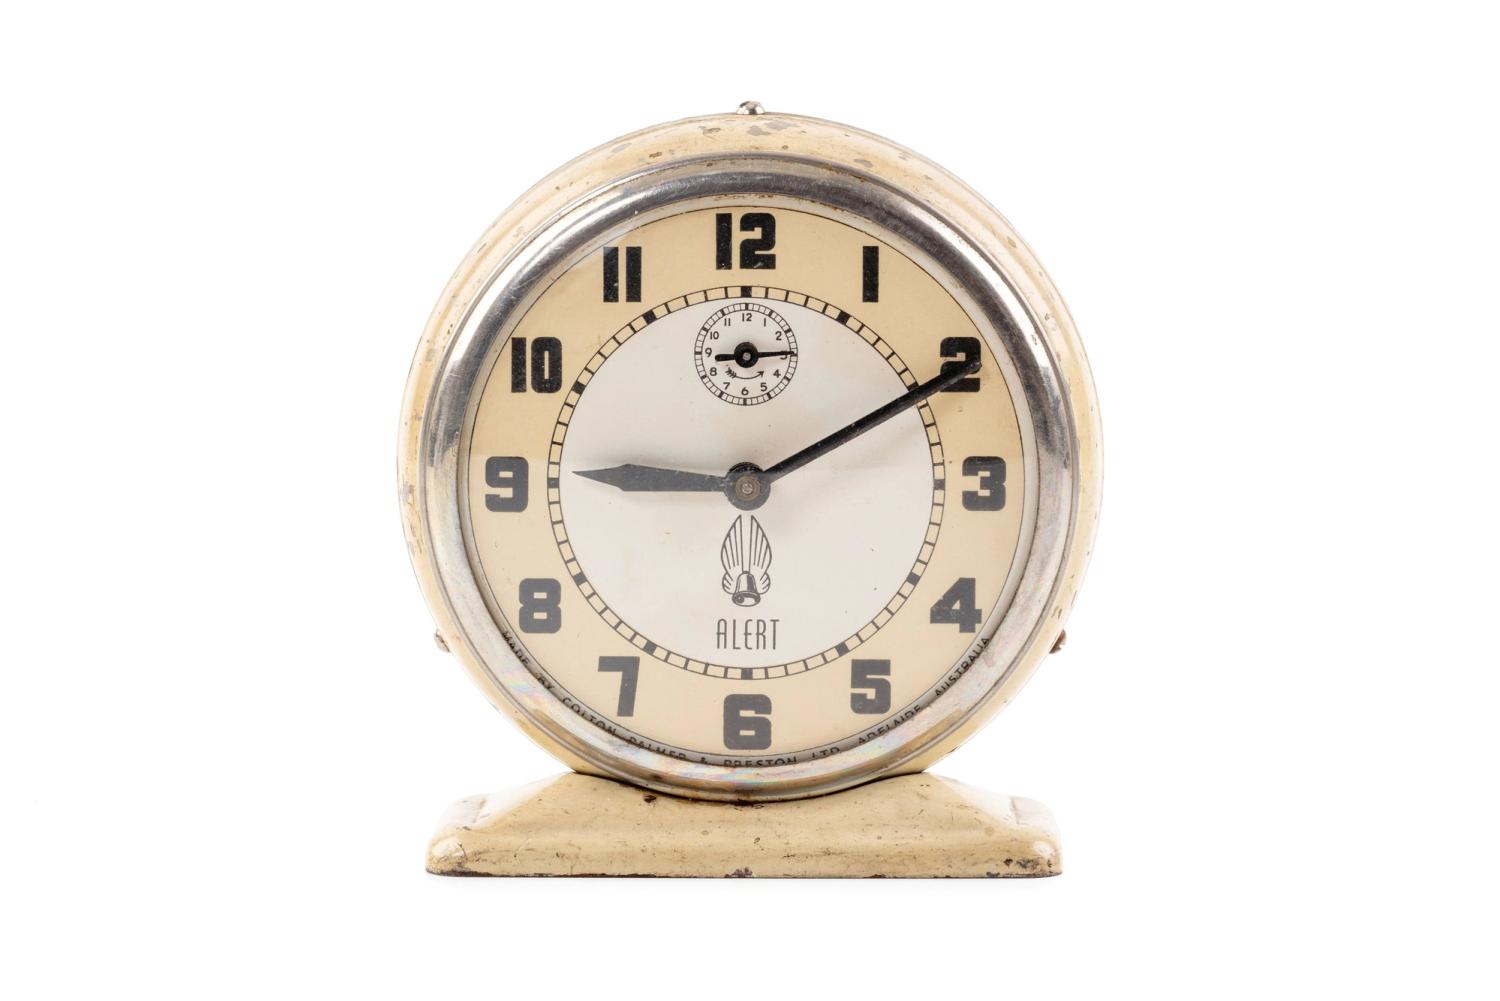 A cream, white and silver alarm clock with a circular face, on a white background